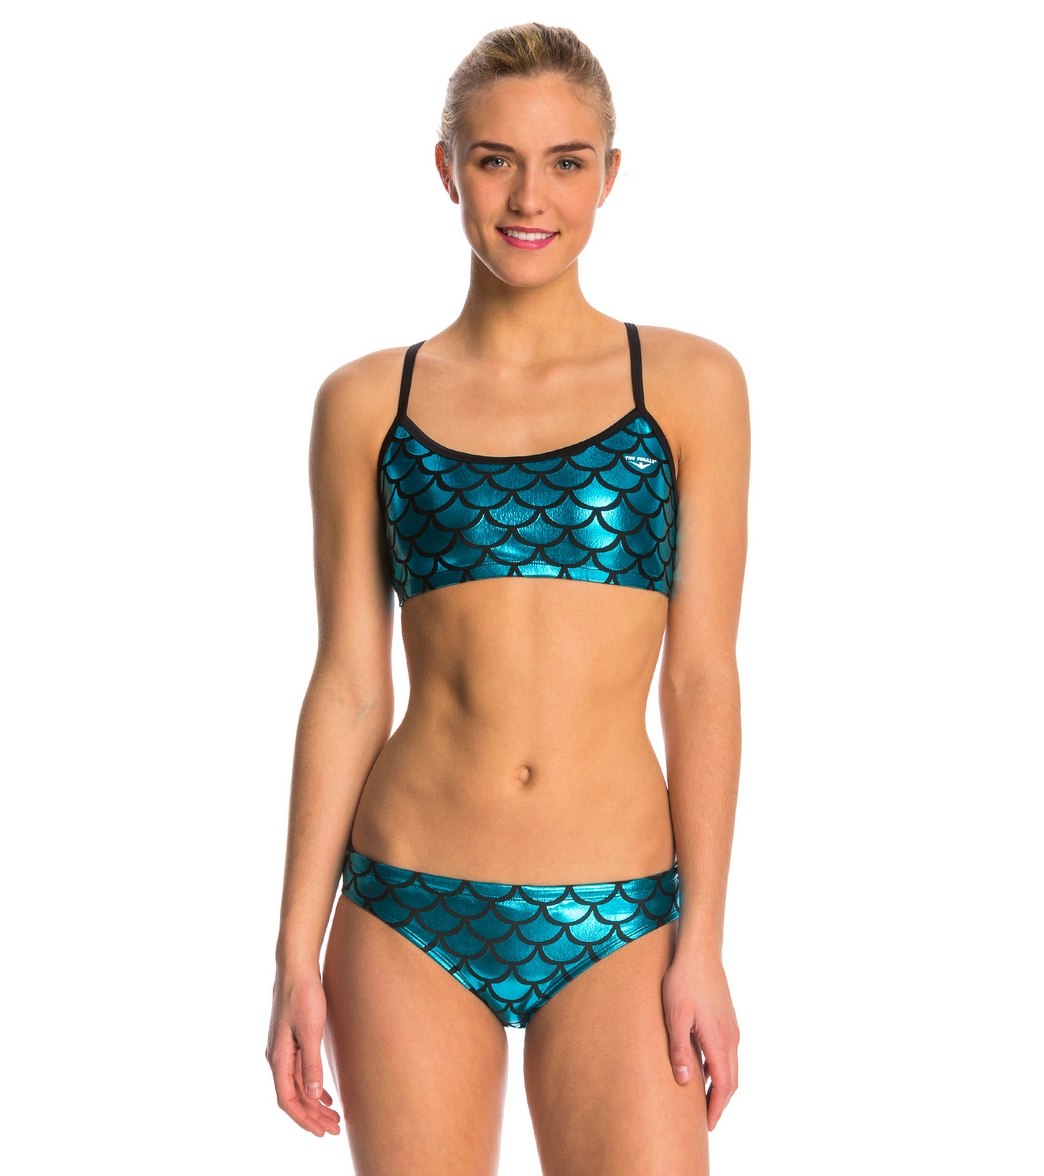 The Finals Funnies Mermaid Workout Two Piece Bikini Swimsuit Set - Turquoise Small Nylon/Polyester/Spandex/Wool - Swimoutlet.com